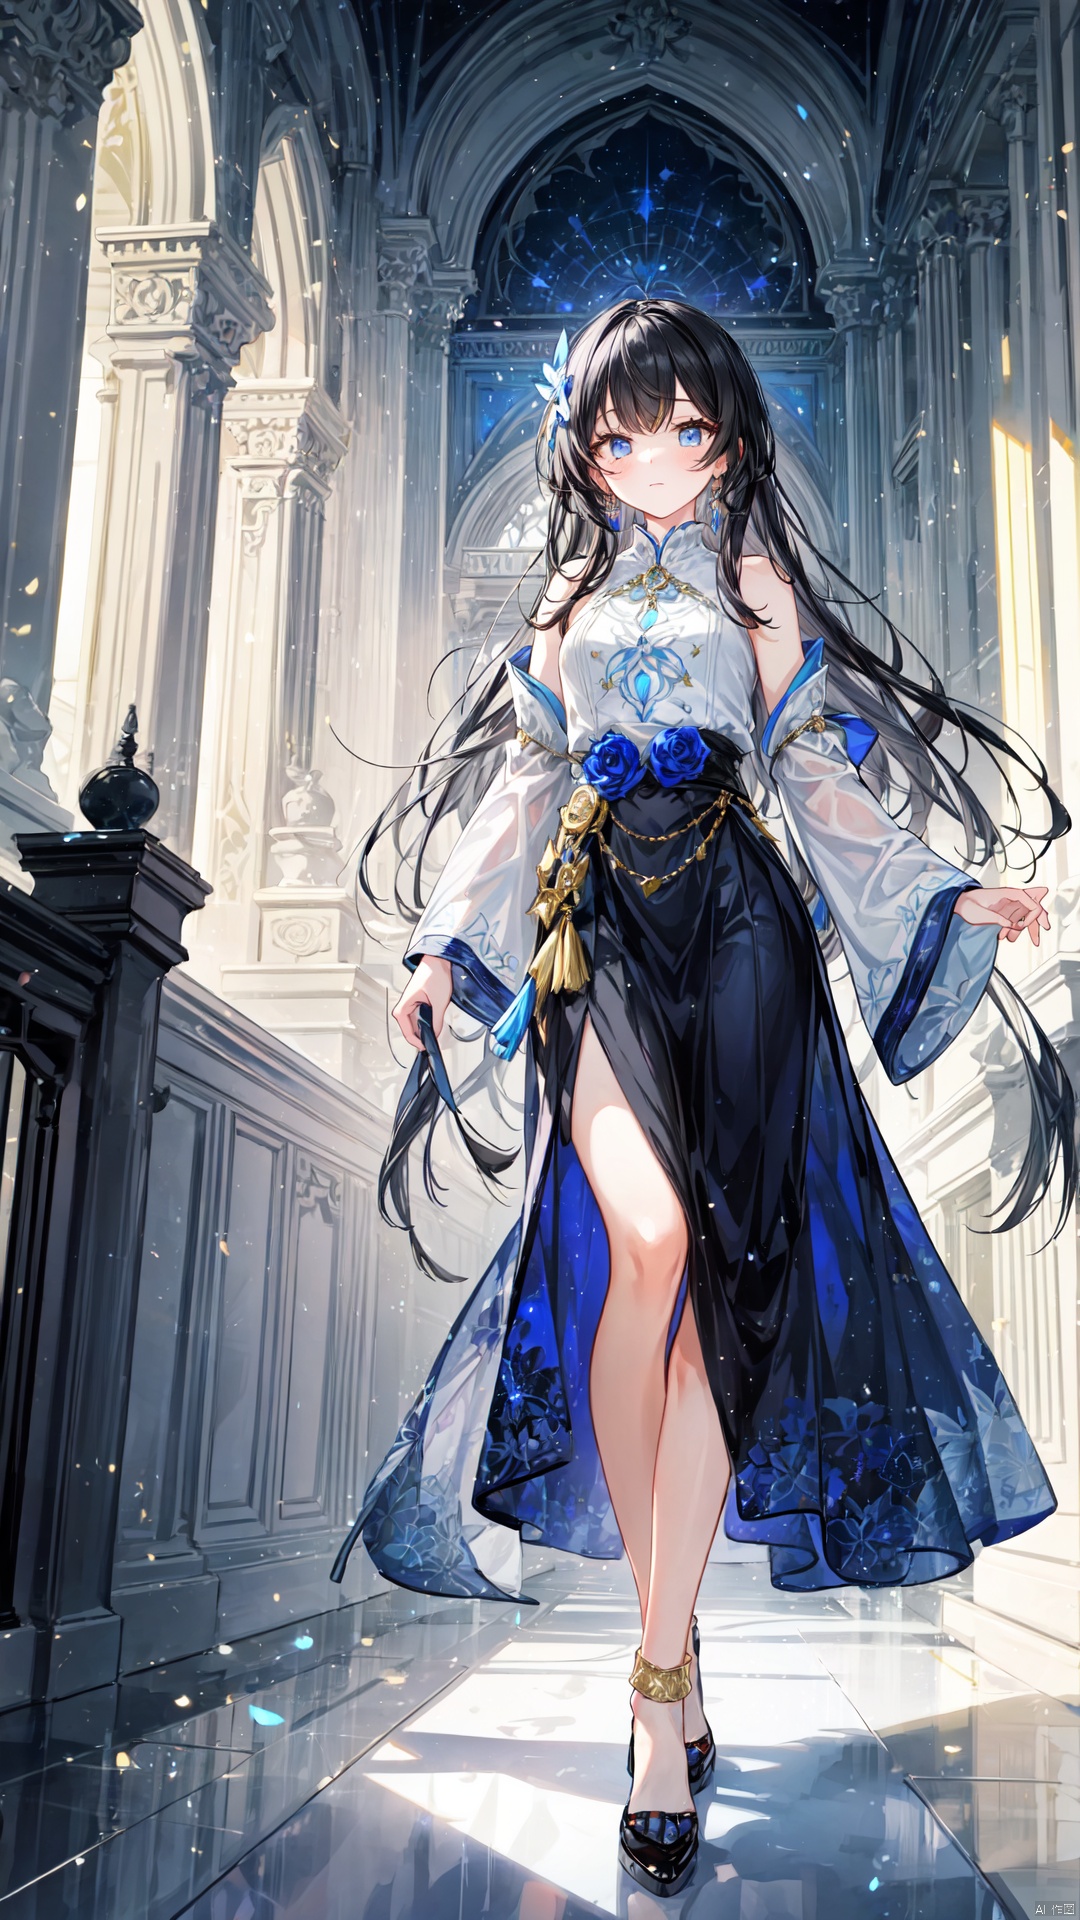  The lady's face was sweet and calm, with long black hair shimmering with silver shadows at the ends. Her long skirt, like the night sky, was adorned with exquisite silver patterns and light gold tassels. She stood there, like a noble and noble woman walking out of the palace, emitting a mysterious and lazy aura, fantasy